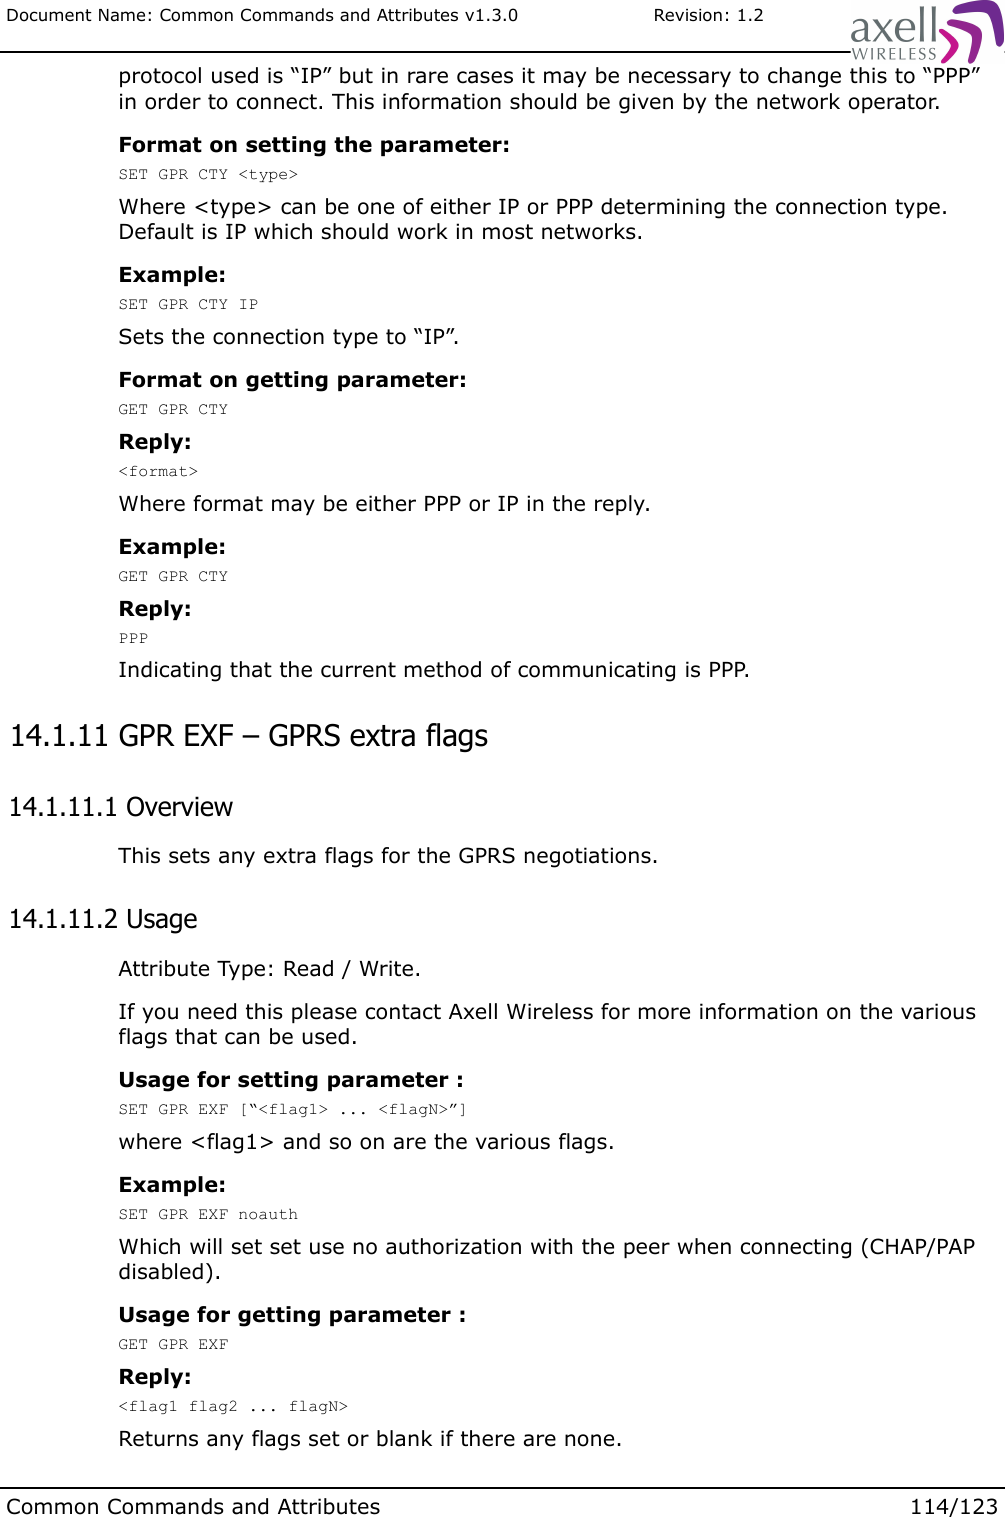 Document Name: Common Commands and Attributes v1.3.0                       Revision: 1.2protocol used is “IP” but in rare cases it may be necessary to change this to “PPP” in order to connect. This information should be given by the network operator.Format on setting the parameter:SET GPR CTY &lt;type&gt;Where &lt;type&gt; can be one of either IP or PPP determining the connection type. Default is IP which should work in most networks.Example:SET GPR CTY IPSets the connection type to “IP”.Format on getting parameter:GET GPR CTYReply:&lt;format&gt;Where format may be either PPP or IP in the reply.Example:GET GPR CTYReply:PPPIndicating that the current method of communicating is PPP. 14.1.11 GPR EXF – GPRS extra flags 14.1.11.1 OverviewThis sets any extra flags for the GPRS negotiations. 14.1.11.2 UsageAttribute Type: Read / Write.If you need this please contact Axell Wireless for more information on the various flags that can be used.Usage for setting parameter :SET GPR EXF [“&lt;flag1&gt; ... &lt;flagN&gt;”]where &lt;flag1&gt; and so on are the various flags.Example:SET GPR EXF noauthWhich will set set use no authorization with the peer when connecting (CHAP/PAP disabled).Usage for getting parameter :GET GPR EXFReply:&lt;flag1 flag2 ... flagN&gt;Returns any flags set or blank if there are none.Common Commands and Attributes 114/123